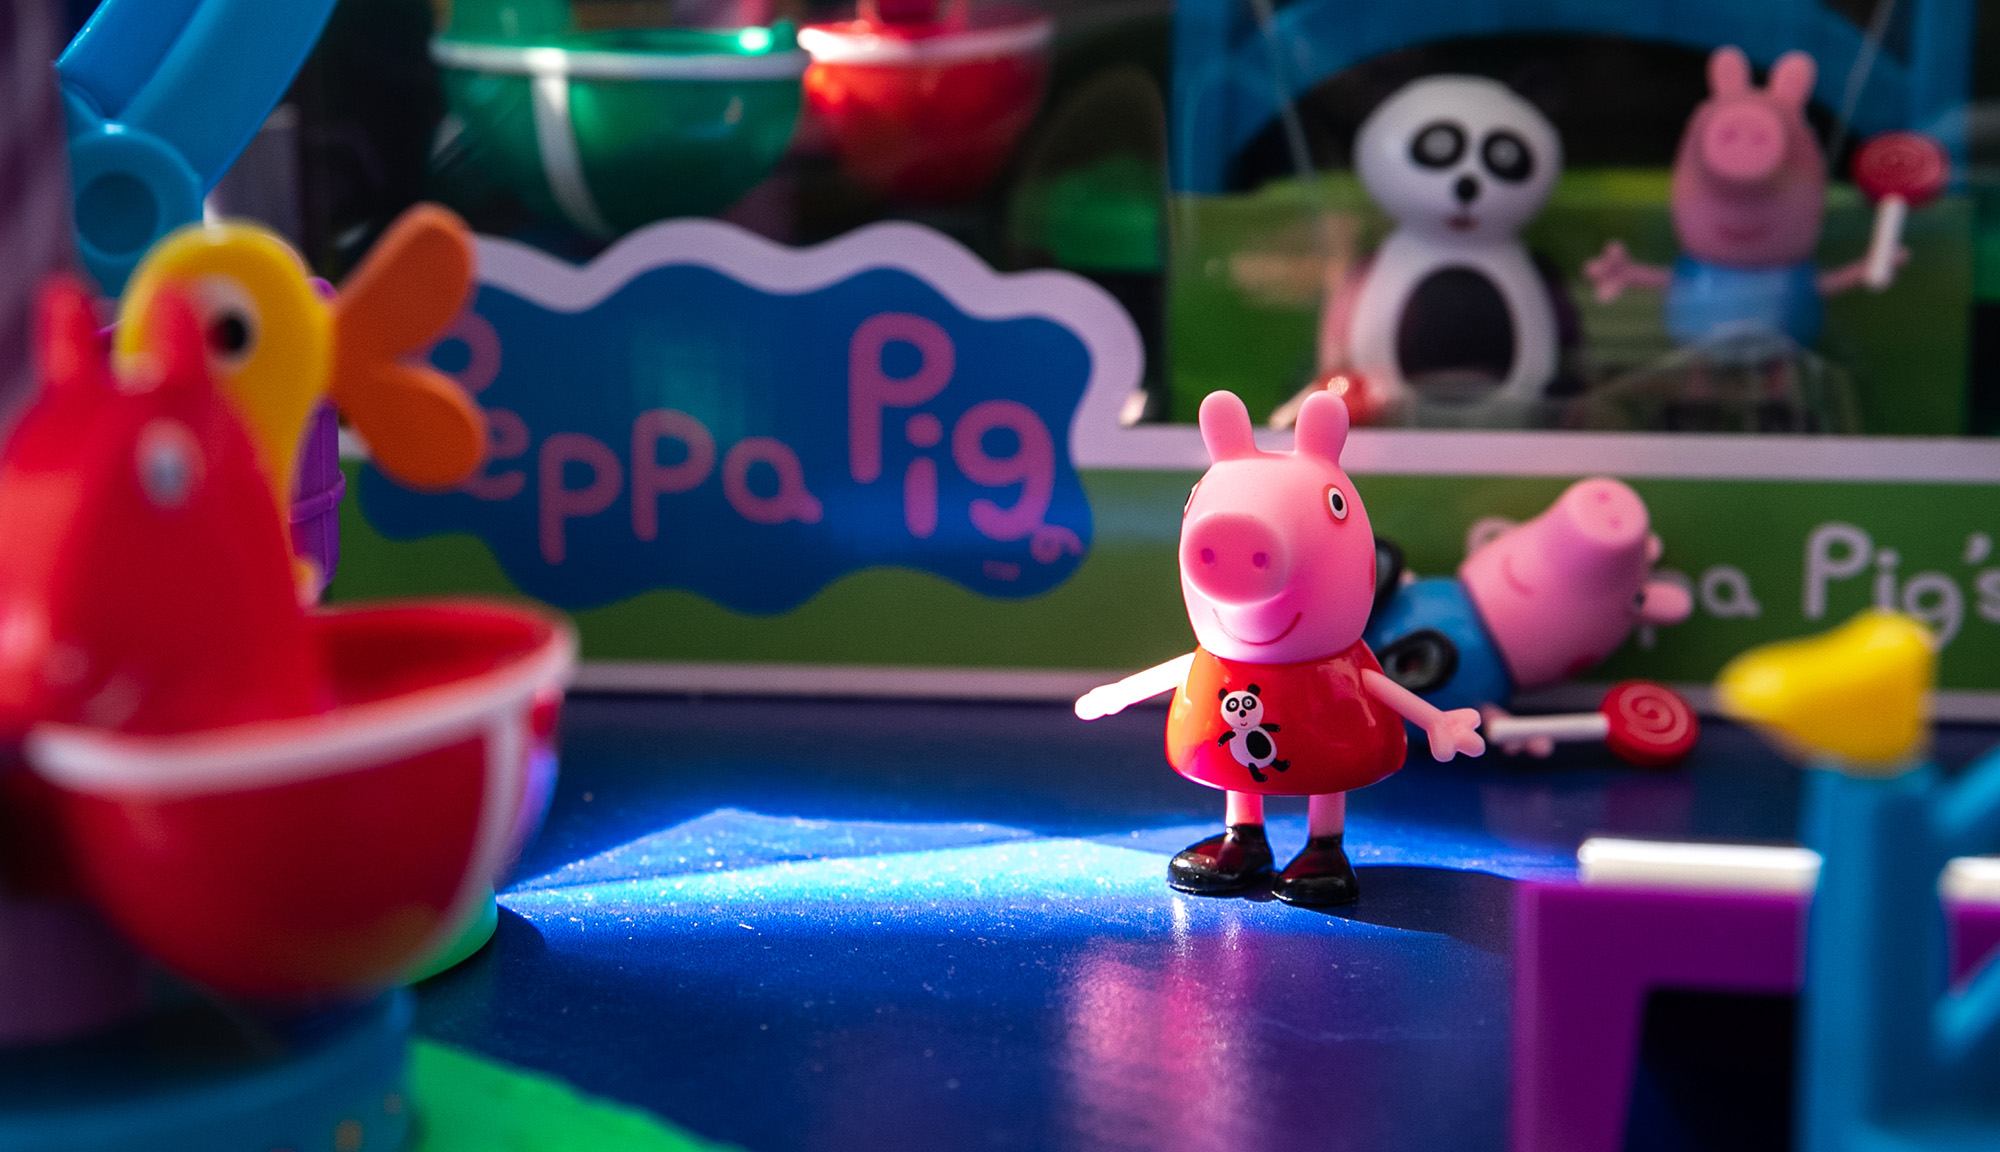 Peppa pig figures • Compare & find best prices today »